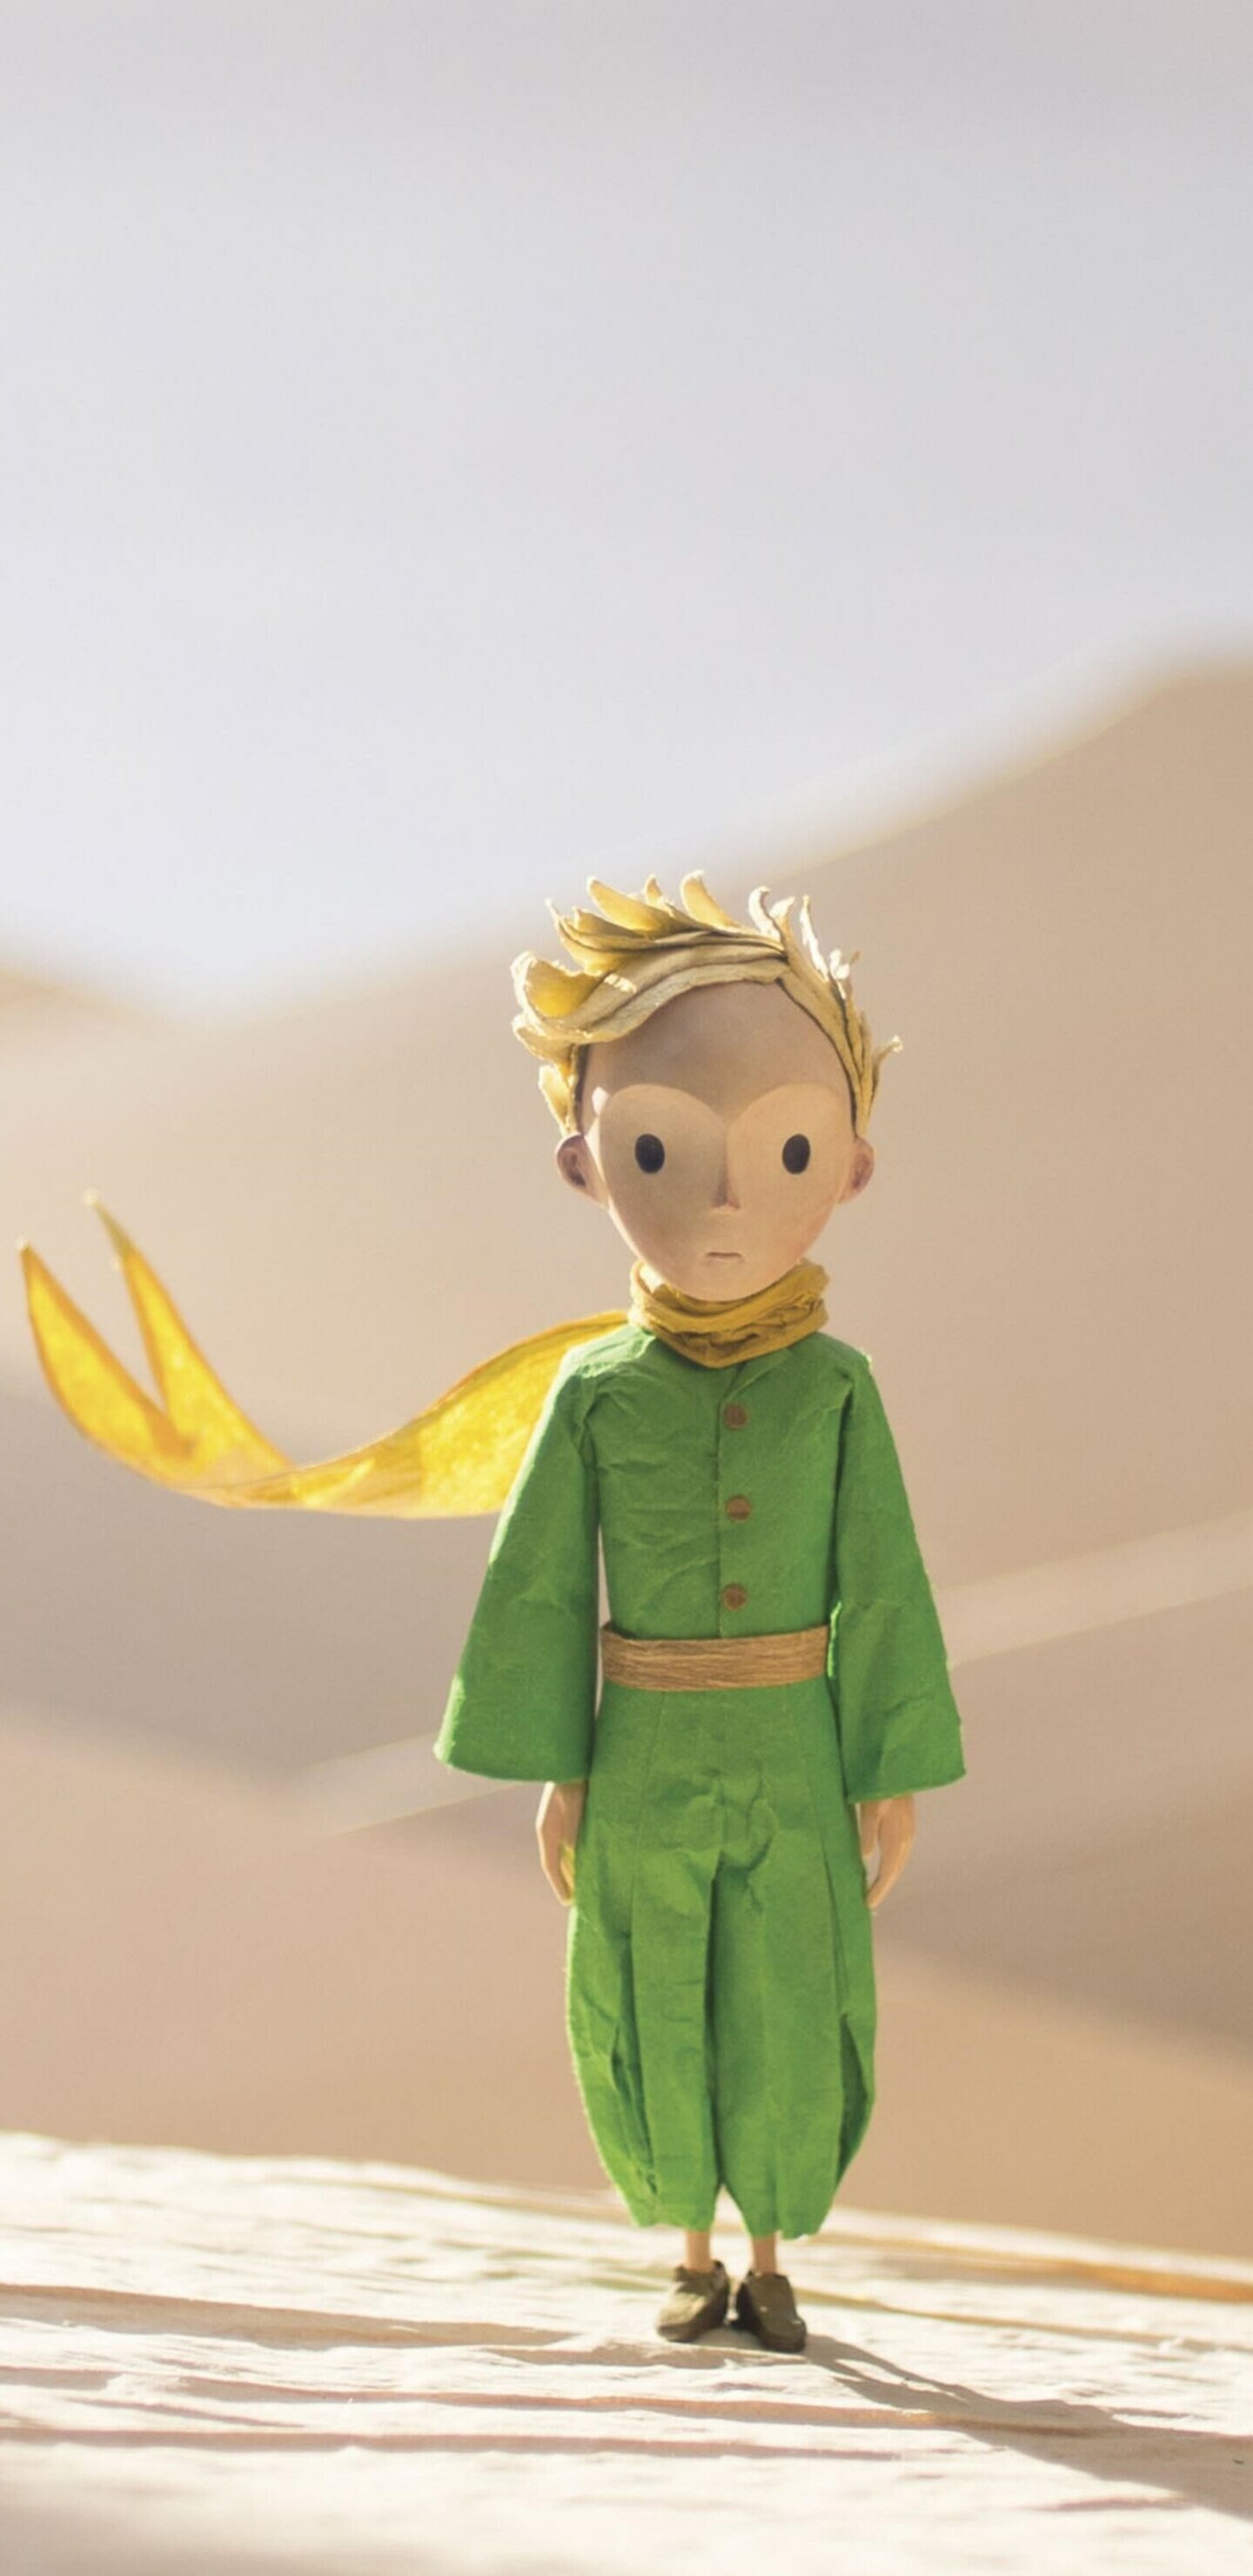 The Little Prince: The most successful French animated film abroad of all time. 1440x2960 HD Background.